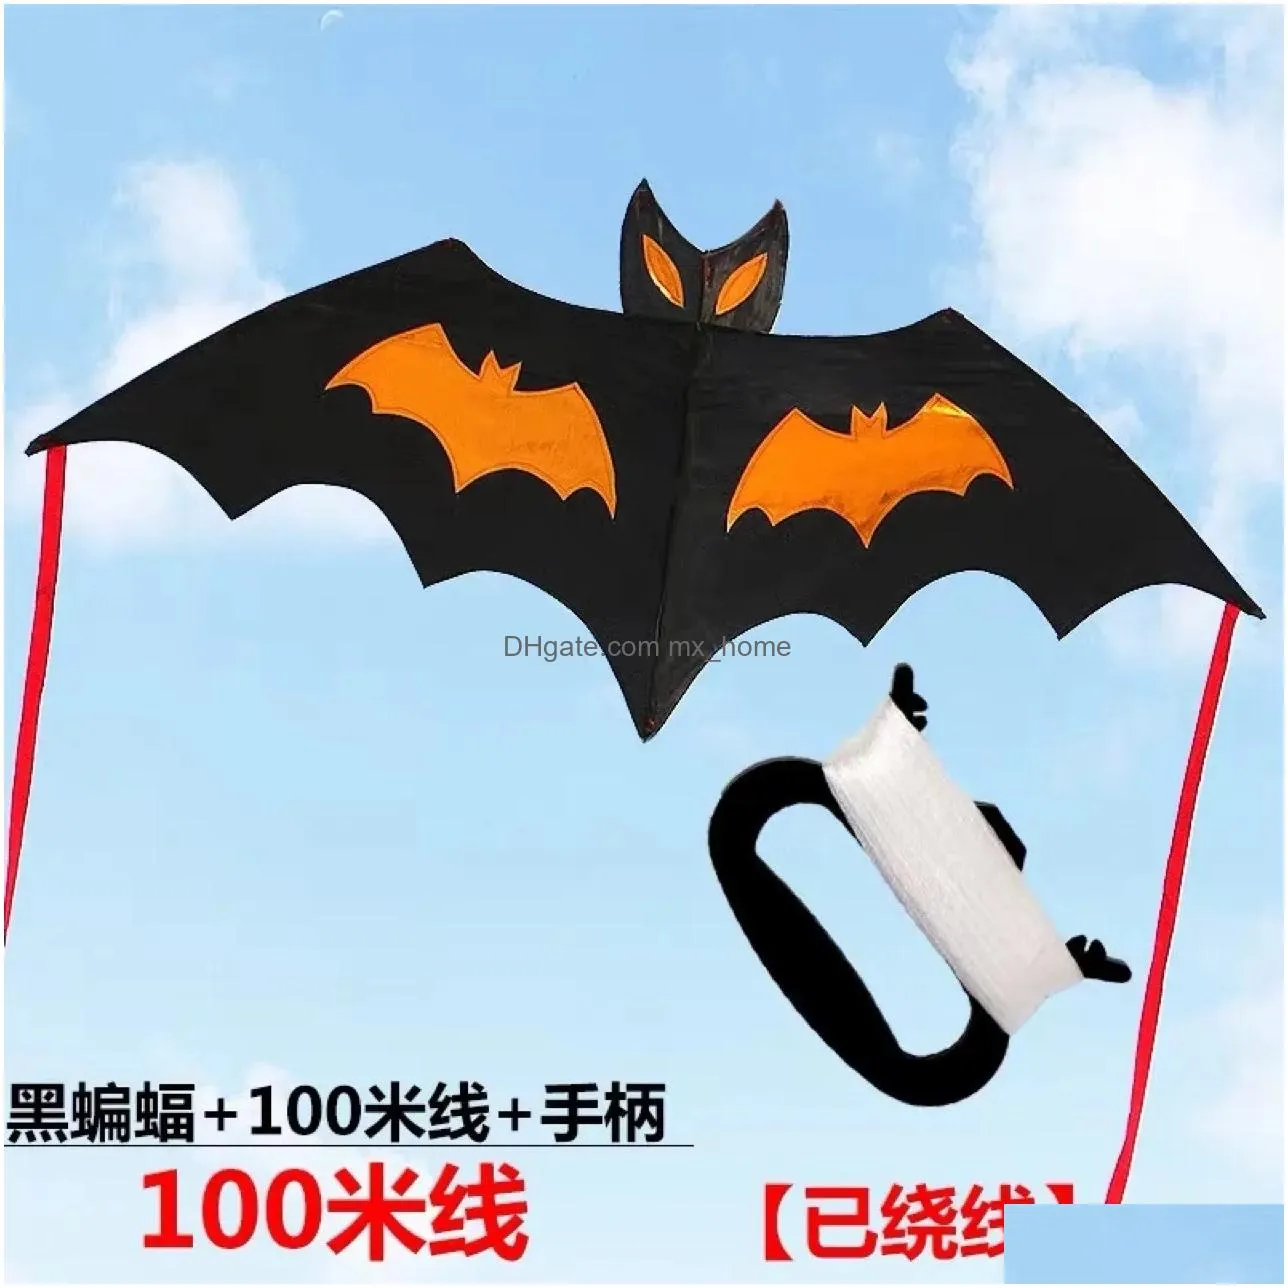 high quality 18 m red bat power kite resin rod with handle and line good flying toy kids2275828